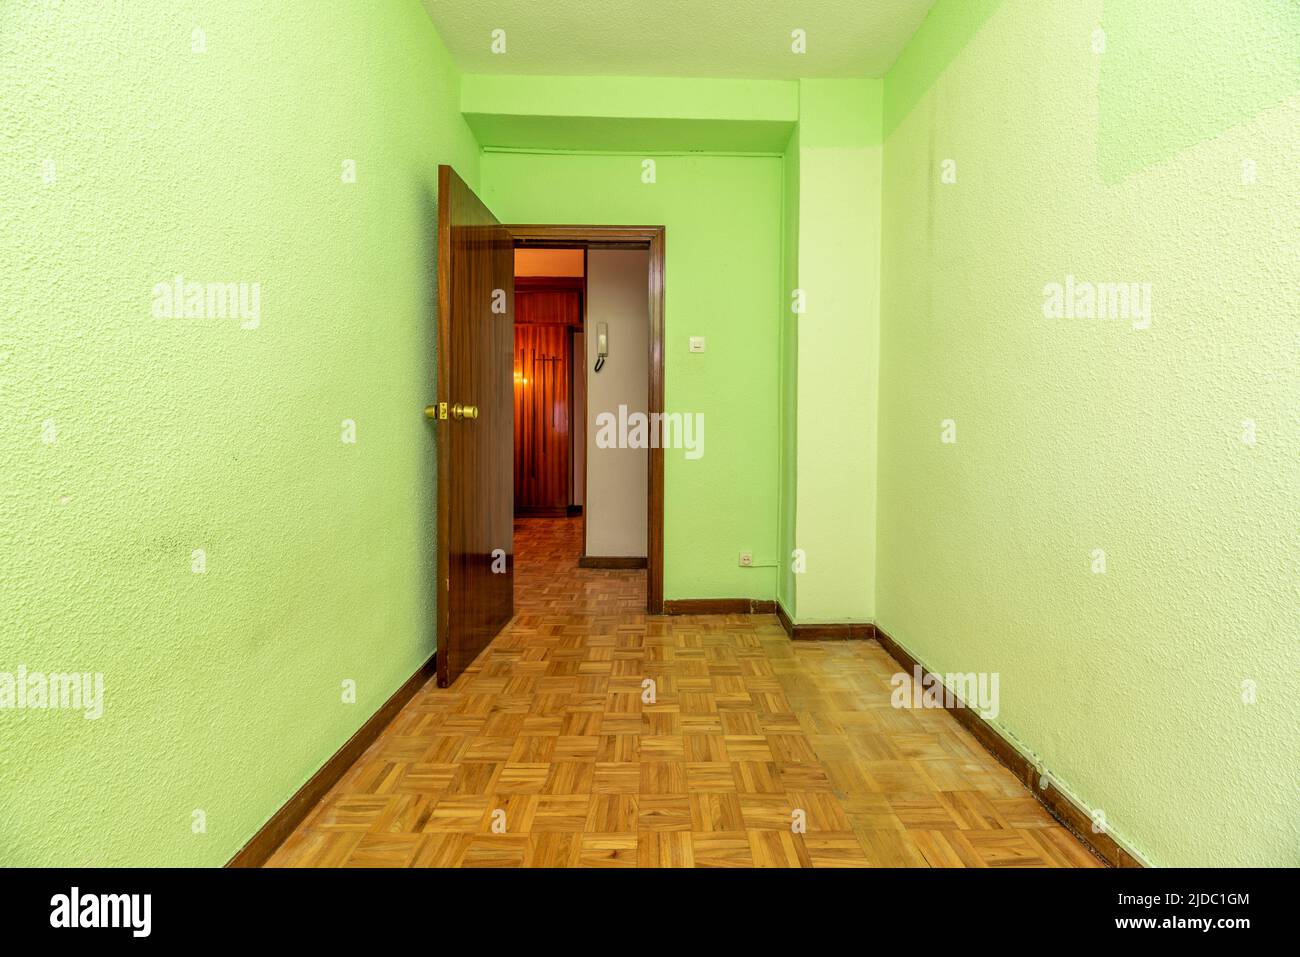 Empty room with light green painted walls, oak parquet flooring and reddish woodwork Stock Photo